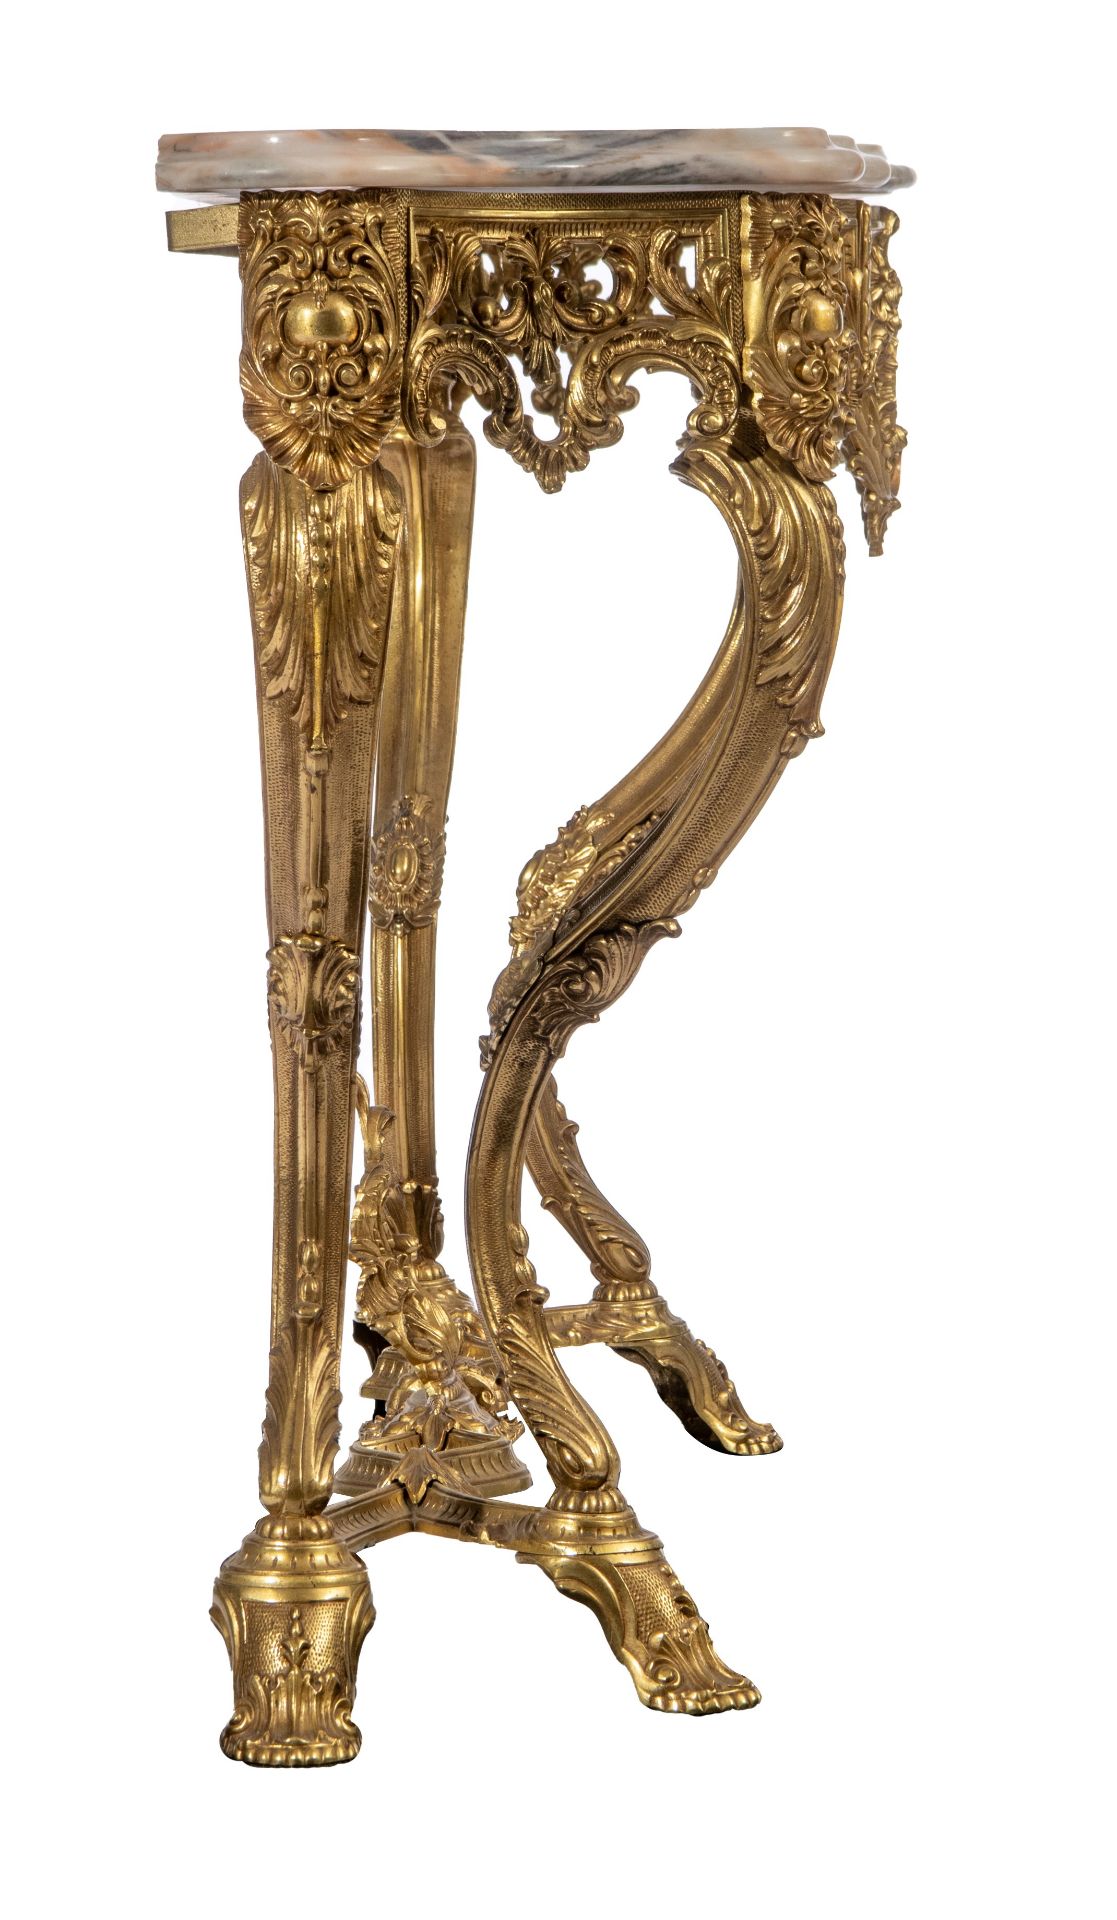 A large Rococo style gilt metal console table and mirror, H 125 - W 110 cm (the mirror) - H 85 - W 1 - Image 6 of 12